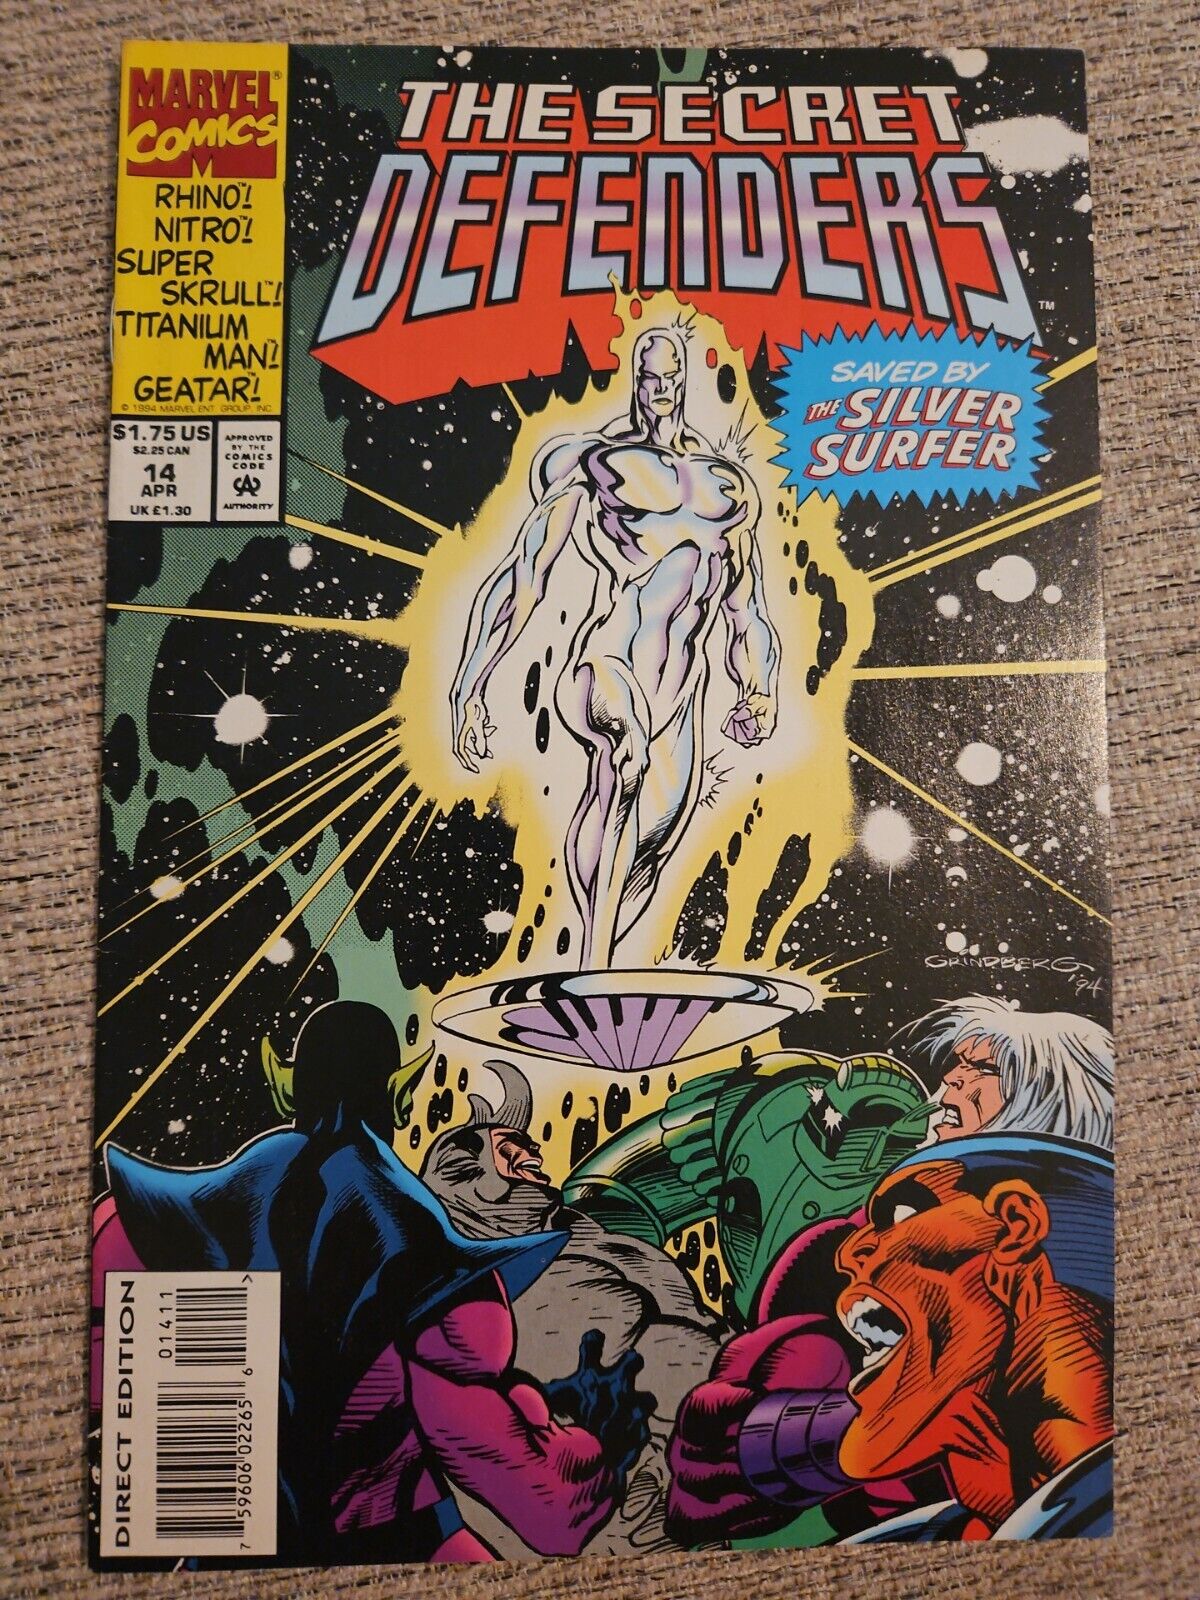 THE SECRET DEFENDERS #14 "SAVED BY SILVER SURFER"